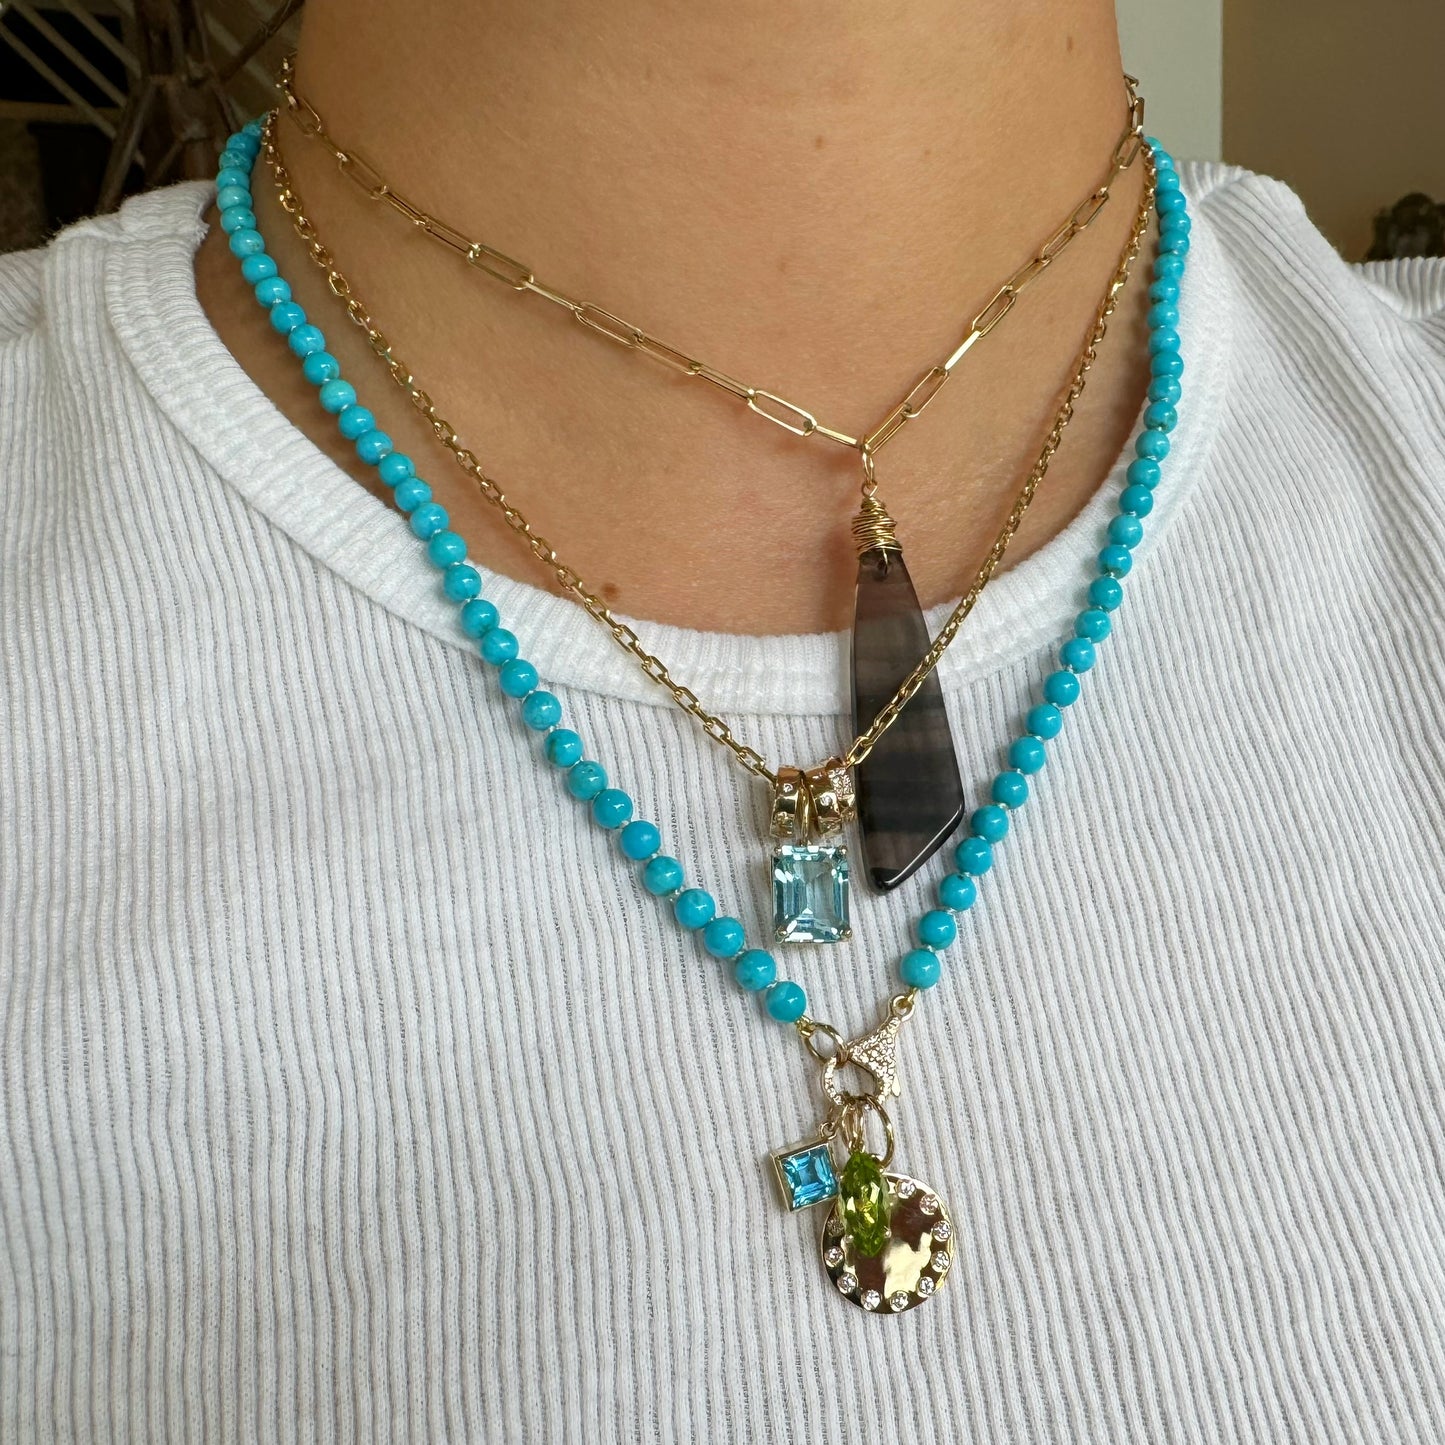 18" Turquoise Necklace with Diamond Clasp